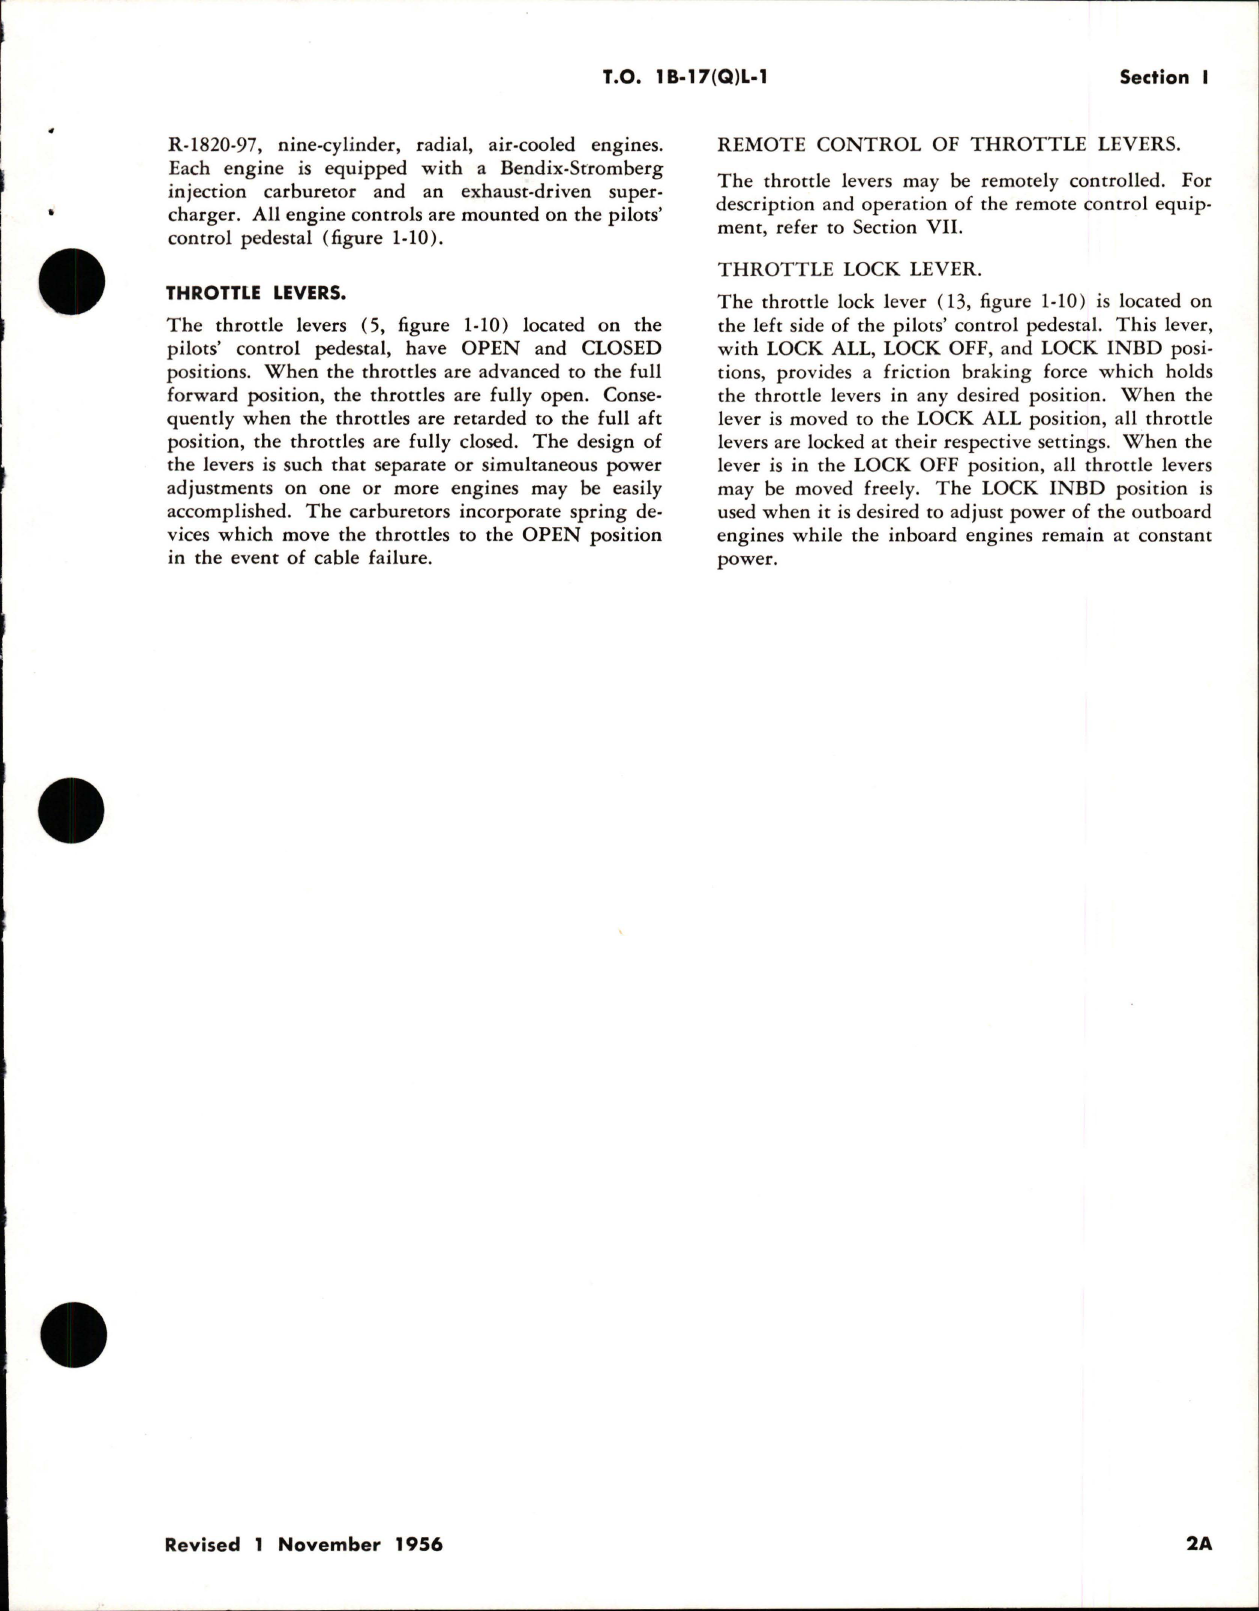 Sample page 7 from AirCorps Library document: Flight Handbook for QB-17L and QB-17N